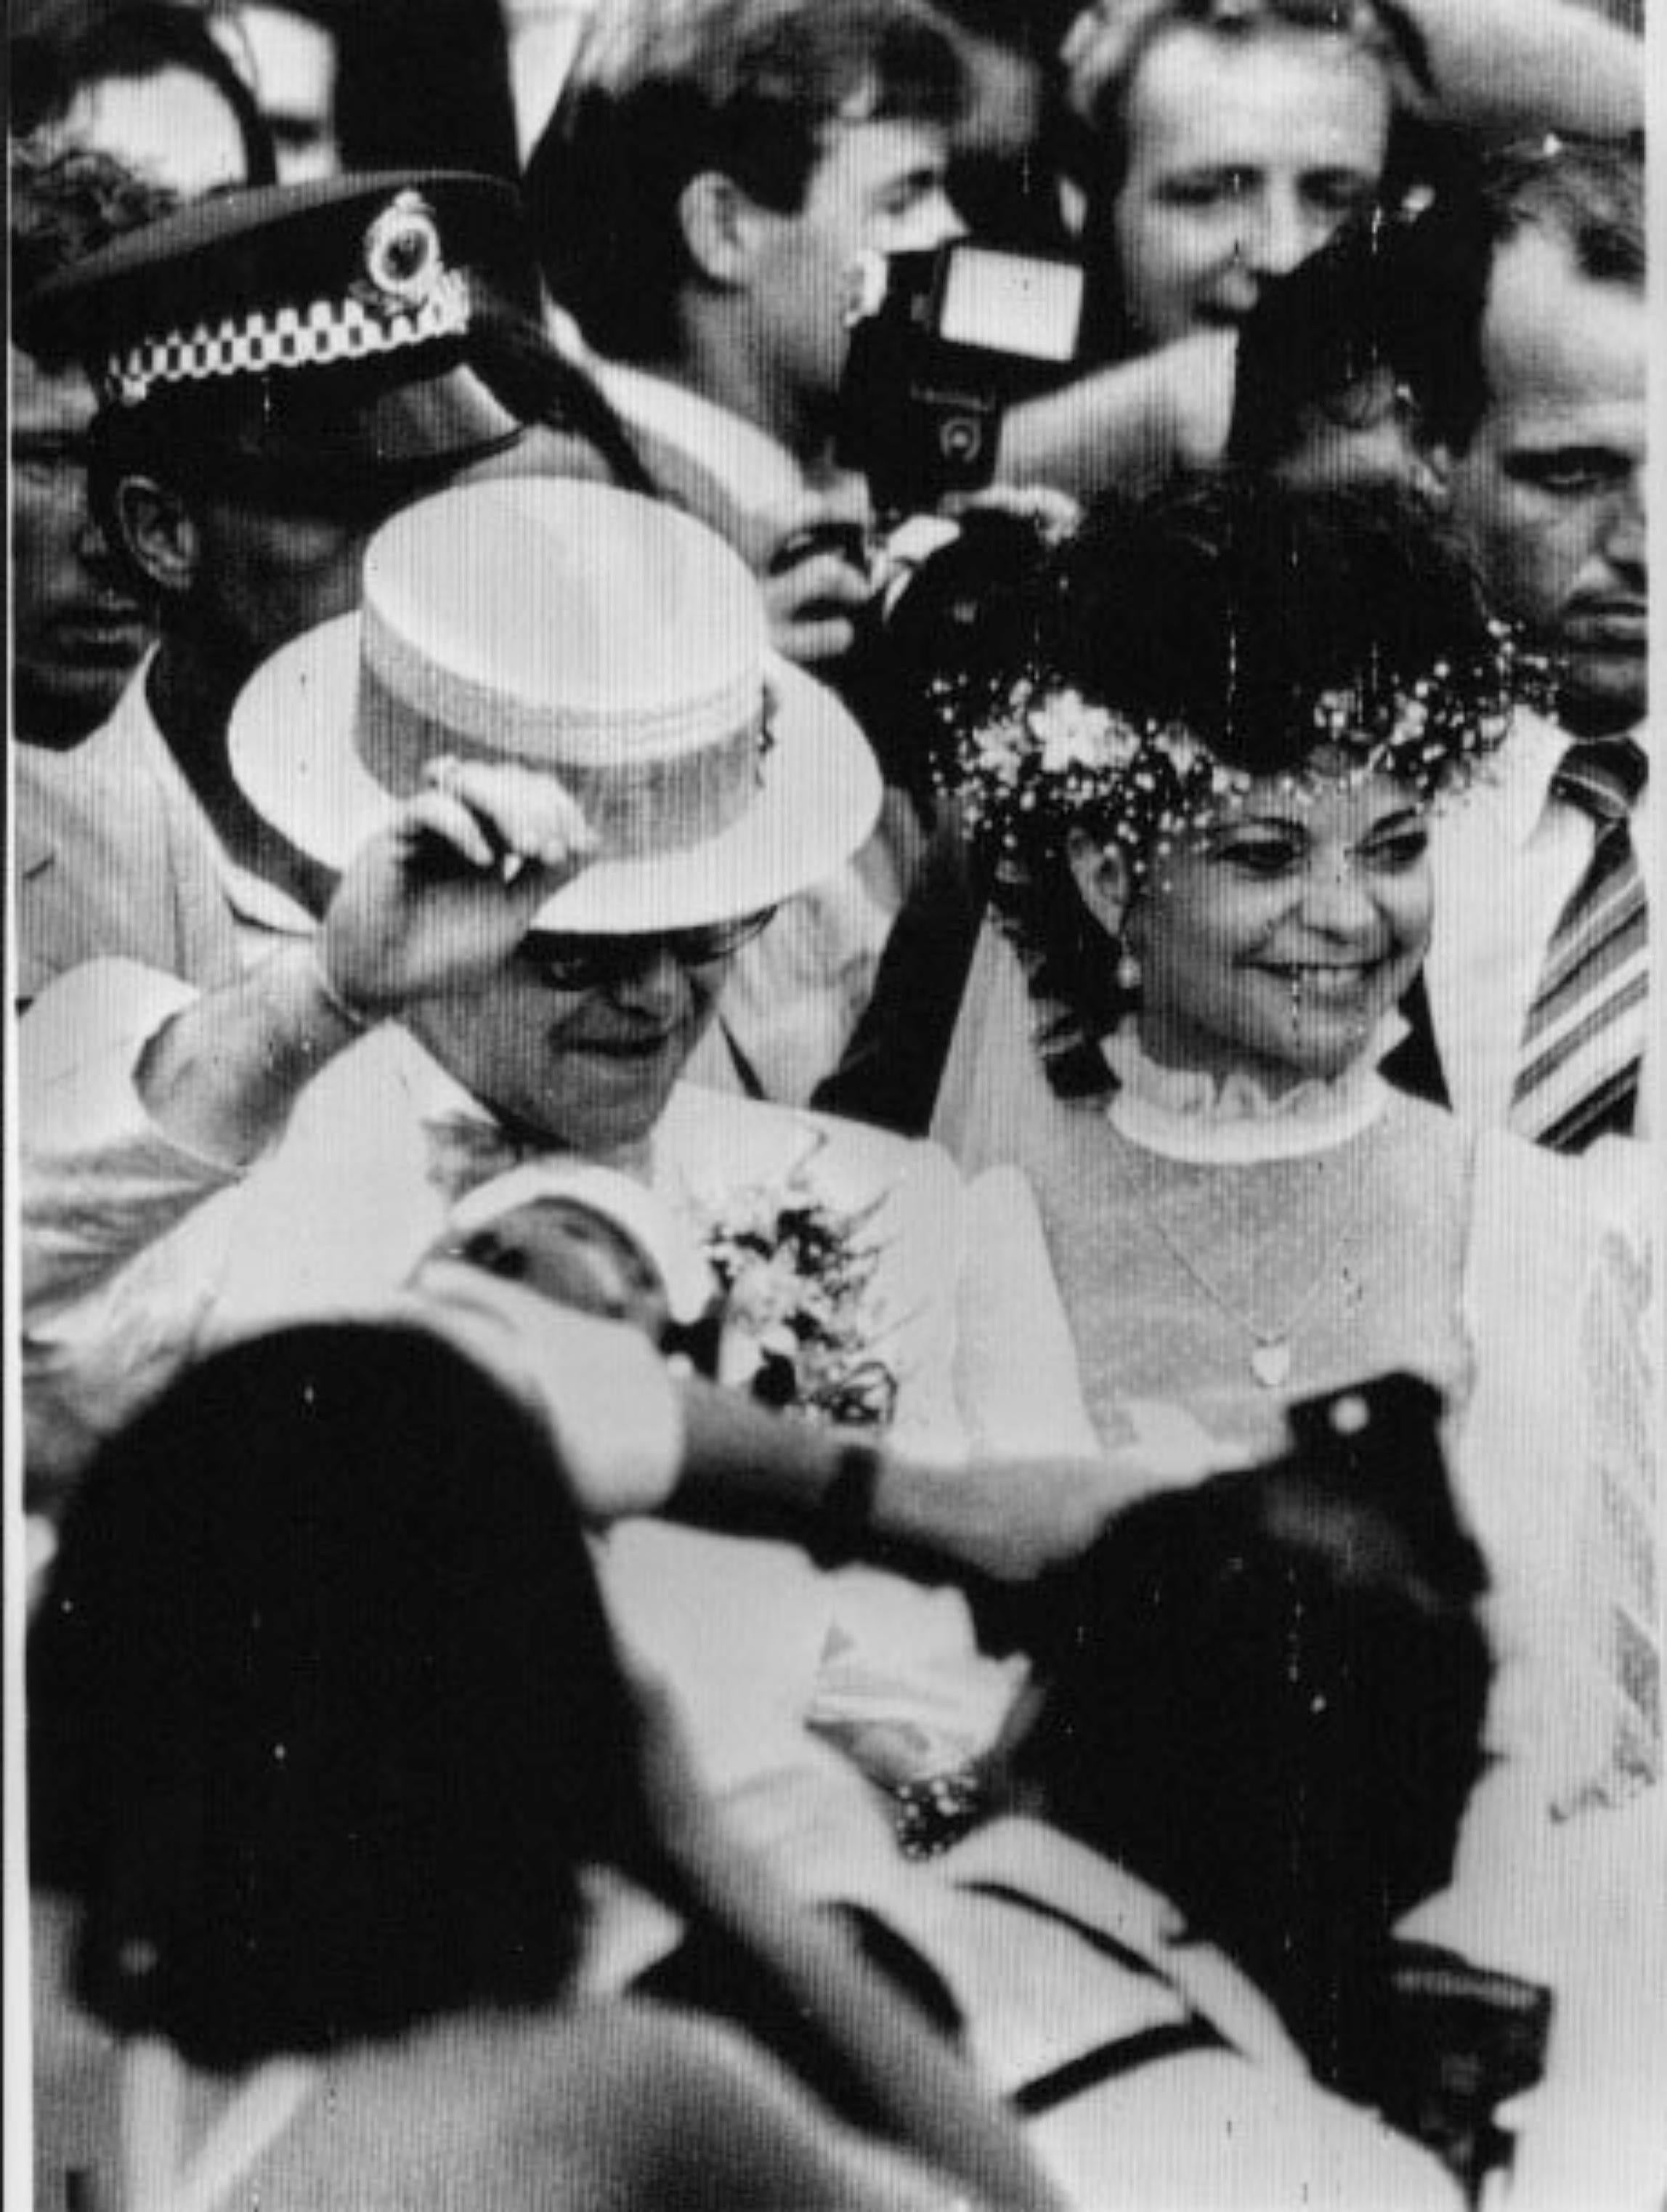 Unknown Figurative Photograph - Elton John and the First Marriage with Renate Blauel - Vintage Photo - 1980s